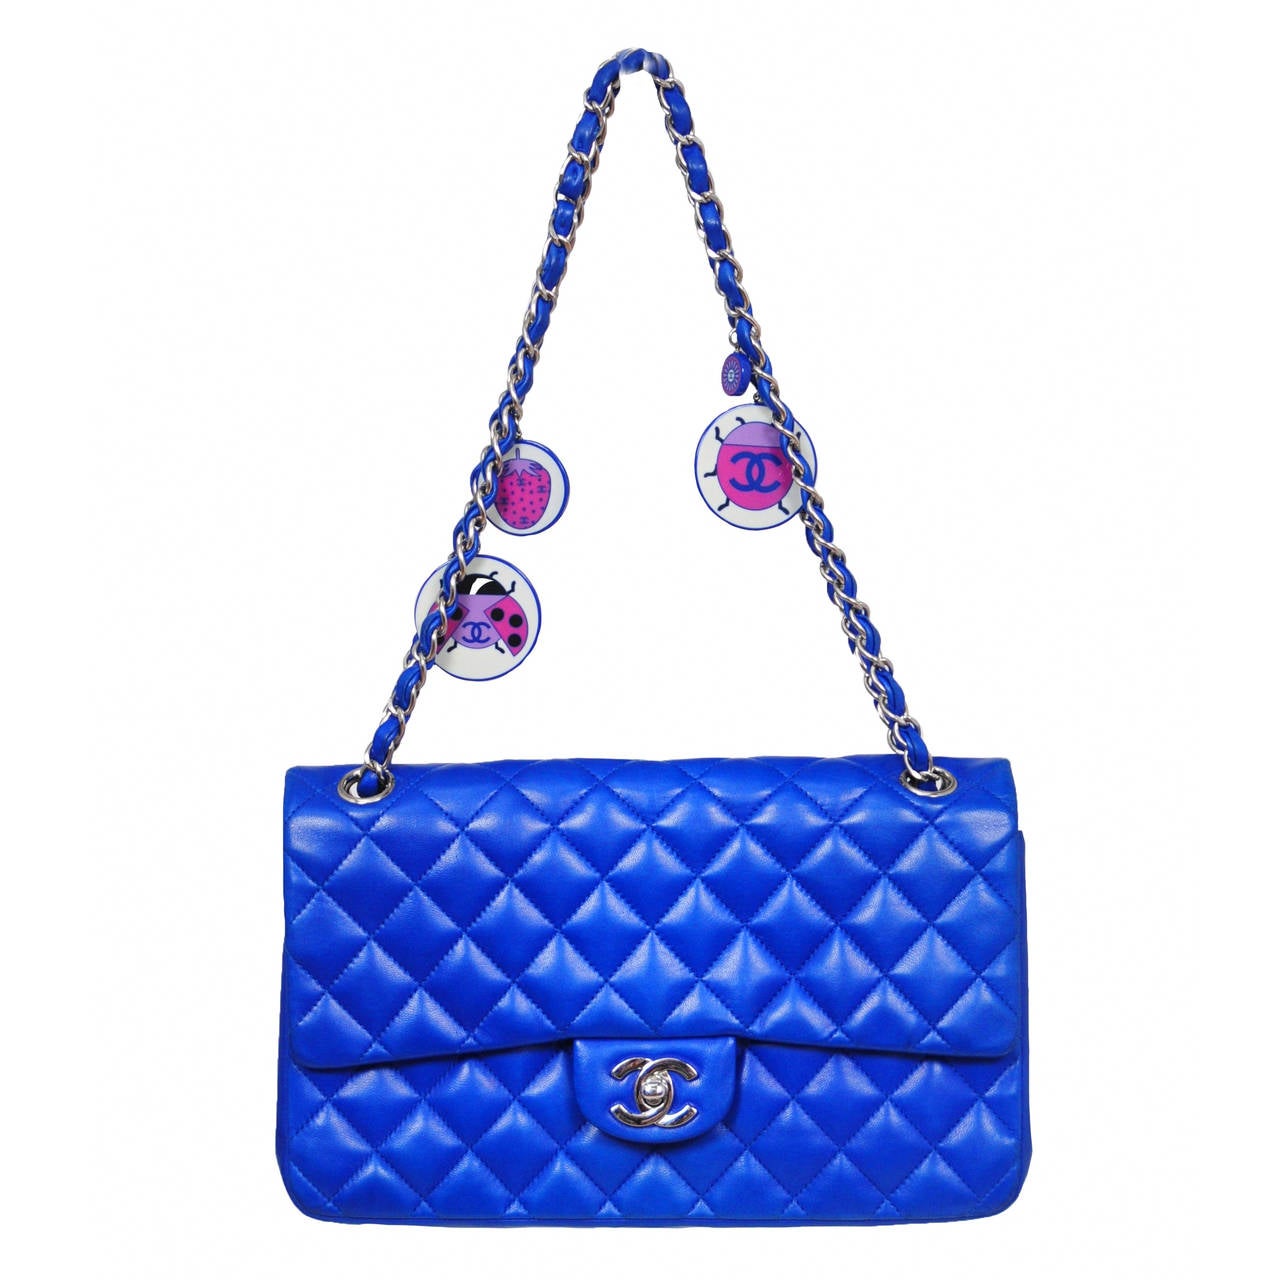 Chanel Cobalt Blue Quilted Lambskin Leather Jumbo Single Flap Bag  Lyst